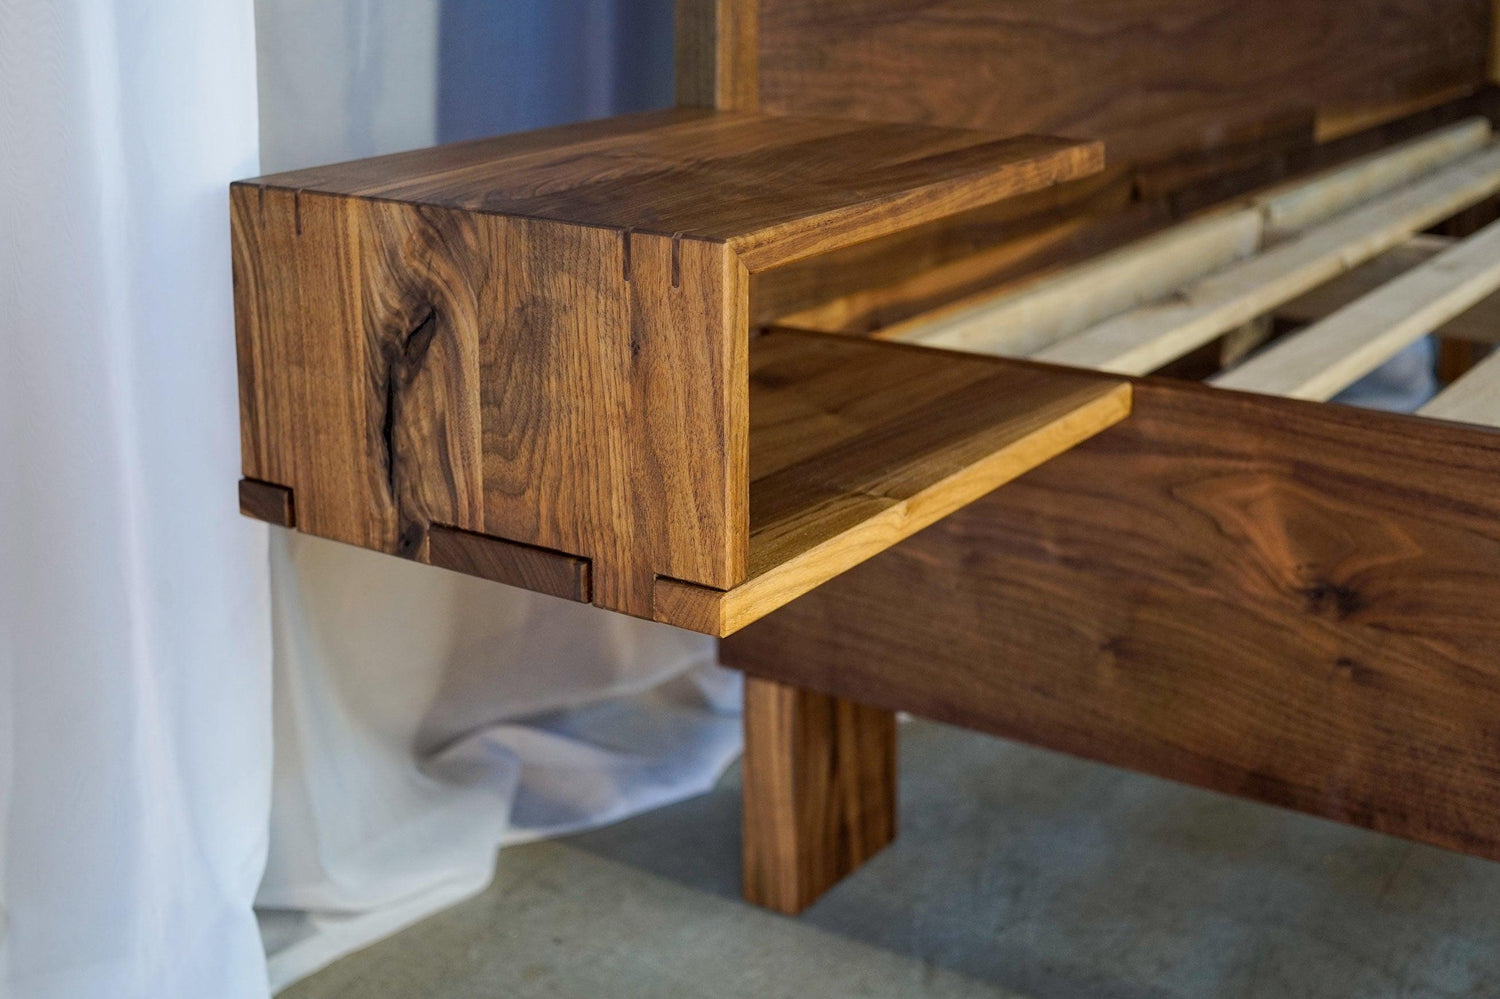 A closeup of the integrated bedside table of a custom walnut bedframe. Large finger joints and a waterfall miter joint is used.